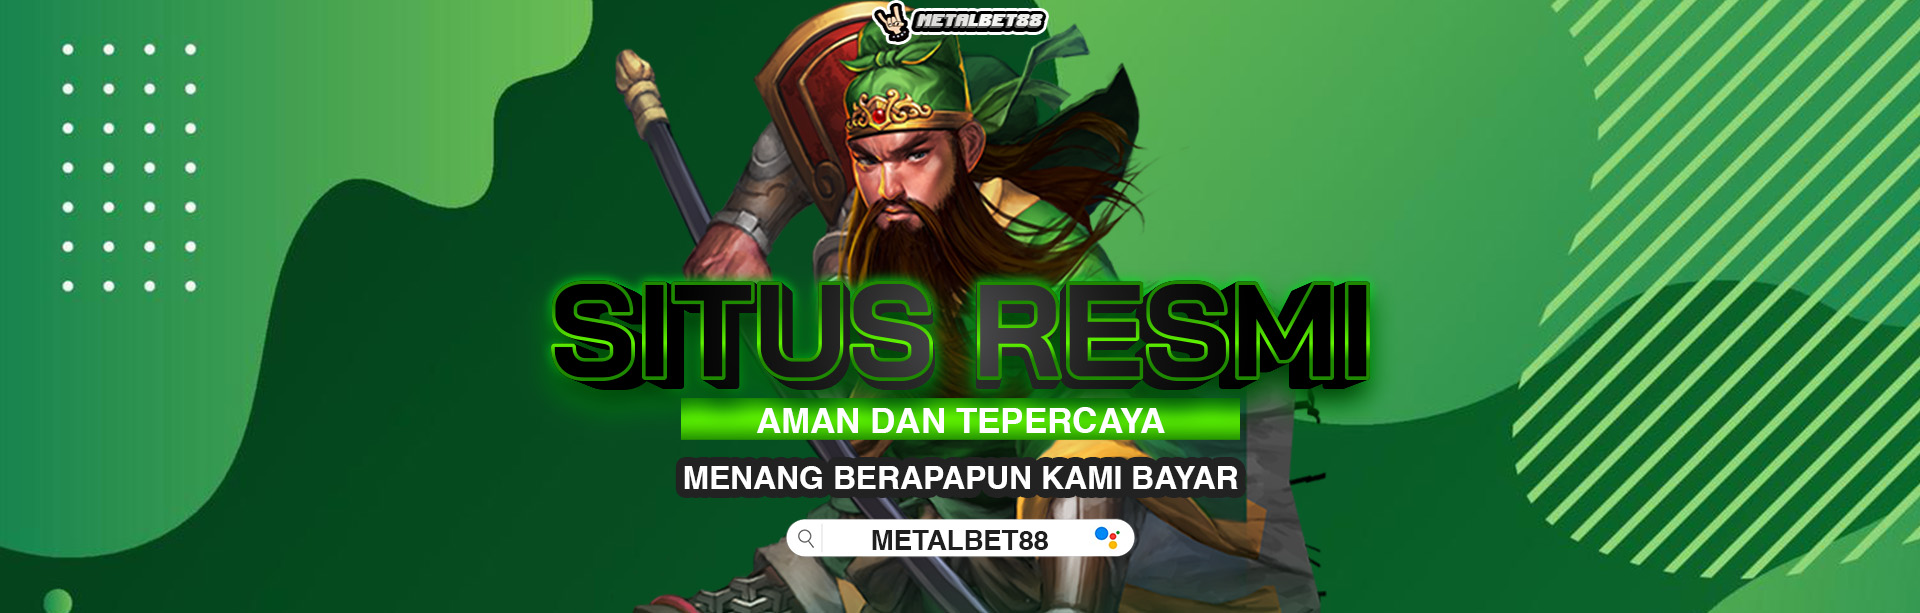 WELCOME TO METALBET88 (1)